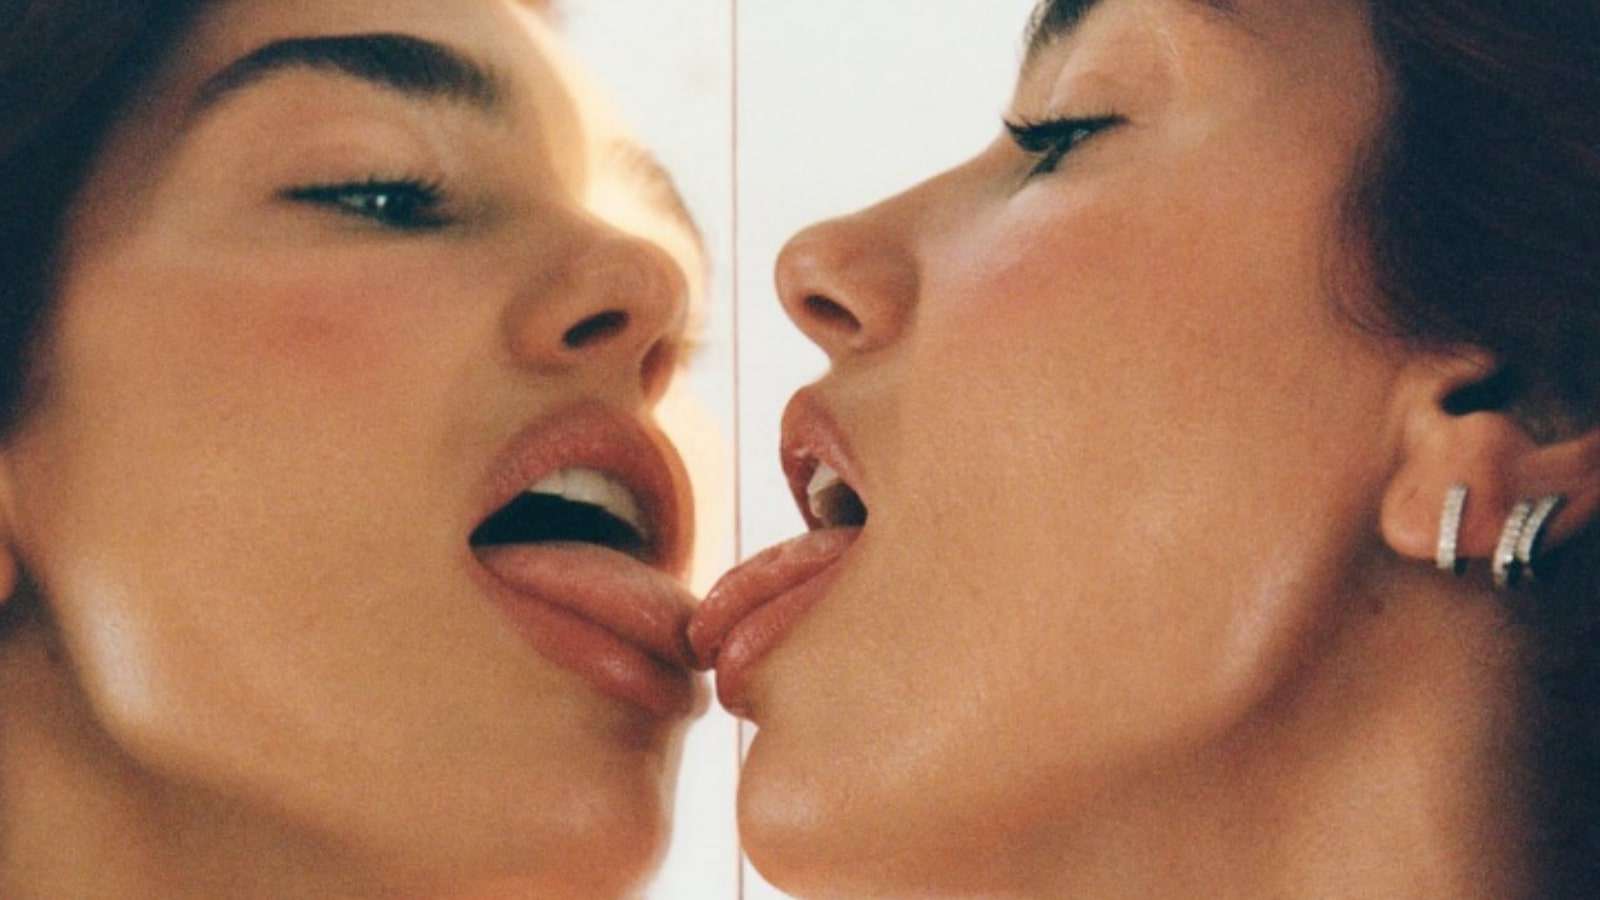 Pop singer Dua Lipa licking a mirror and a reflection of herself.